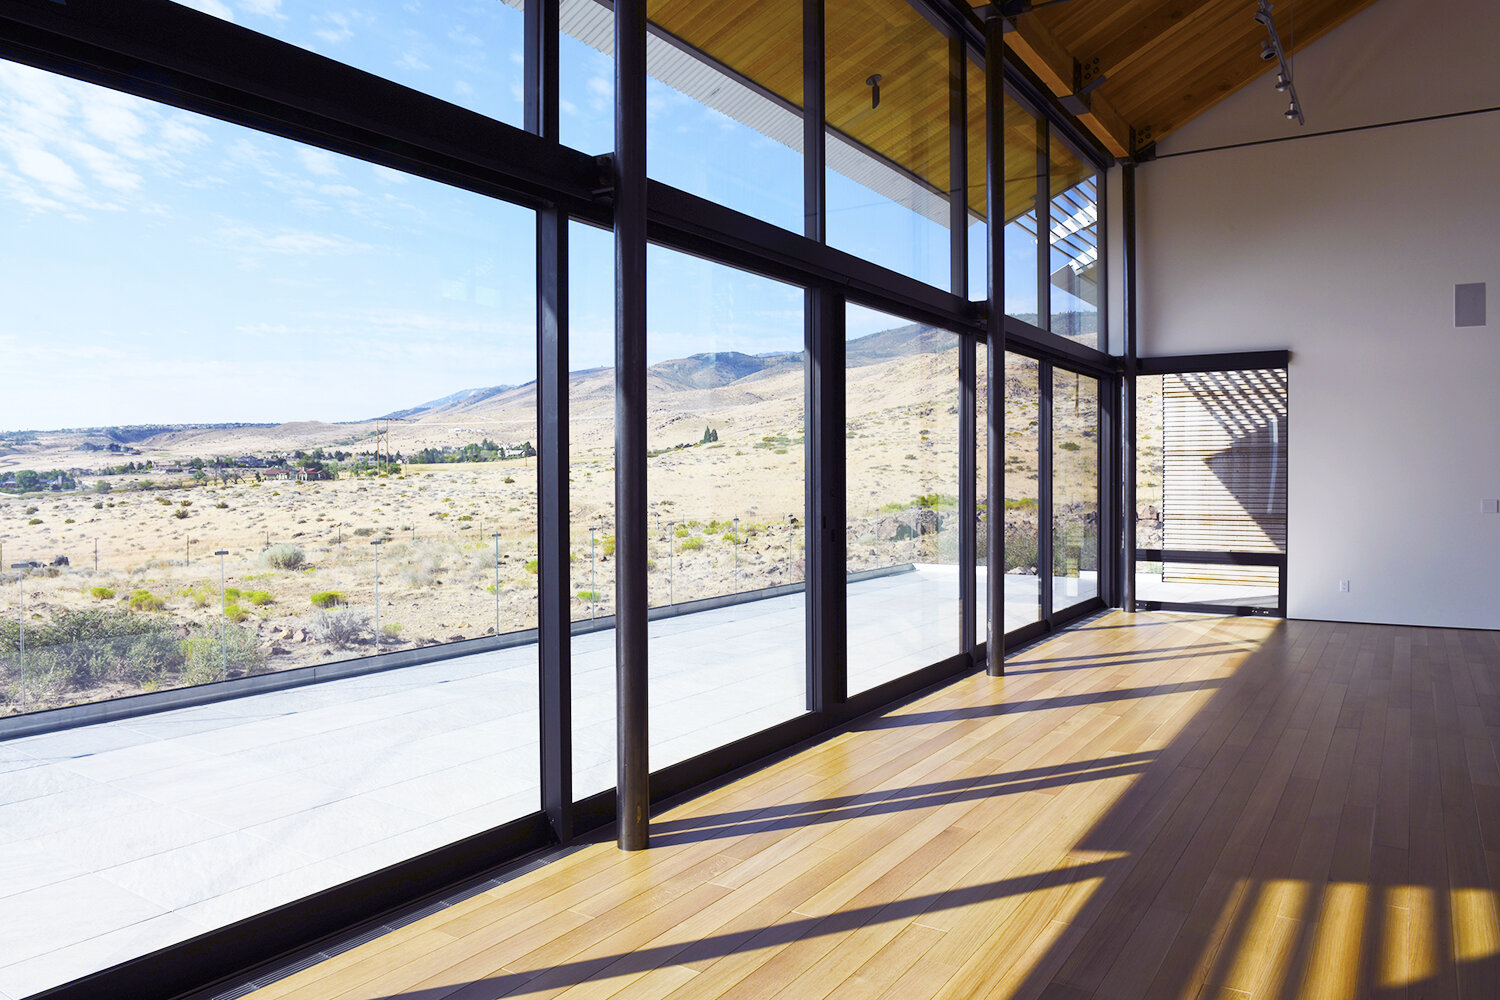 Projects_House in the High Desert_11.jpg